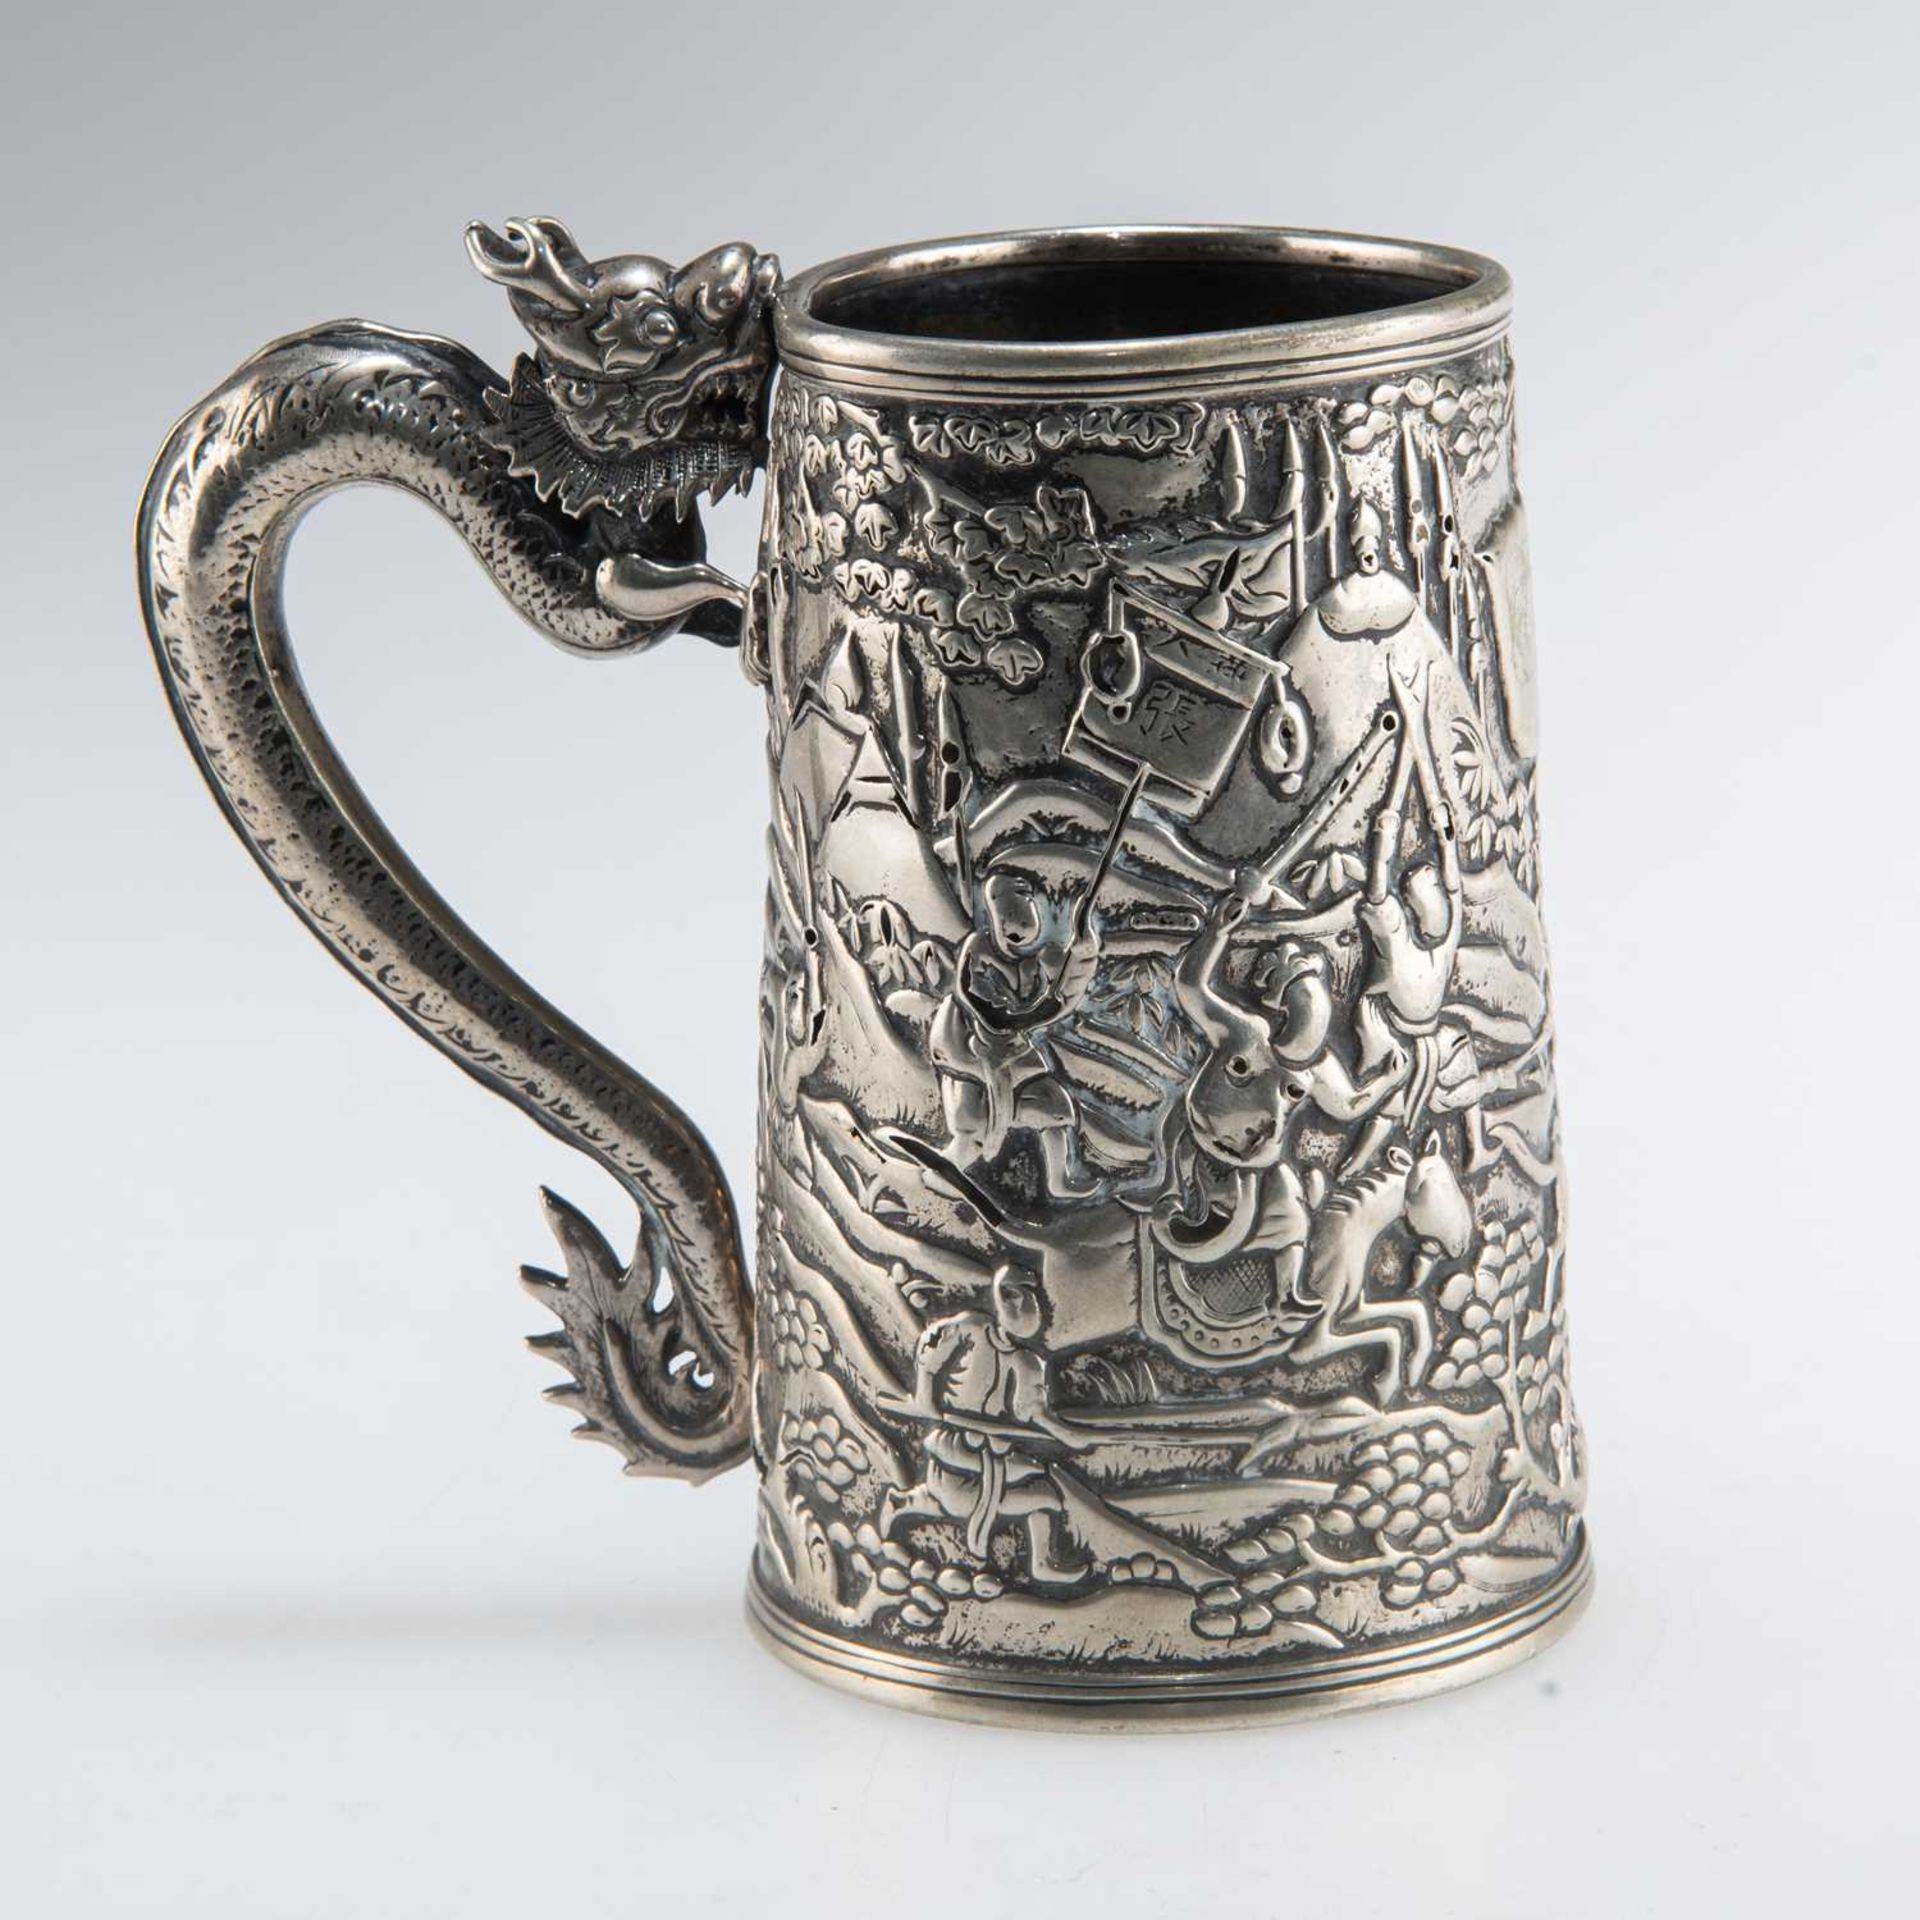 A 19TH CENTURY CHINESE EXPORT SILVER MUG